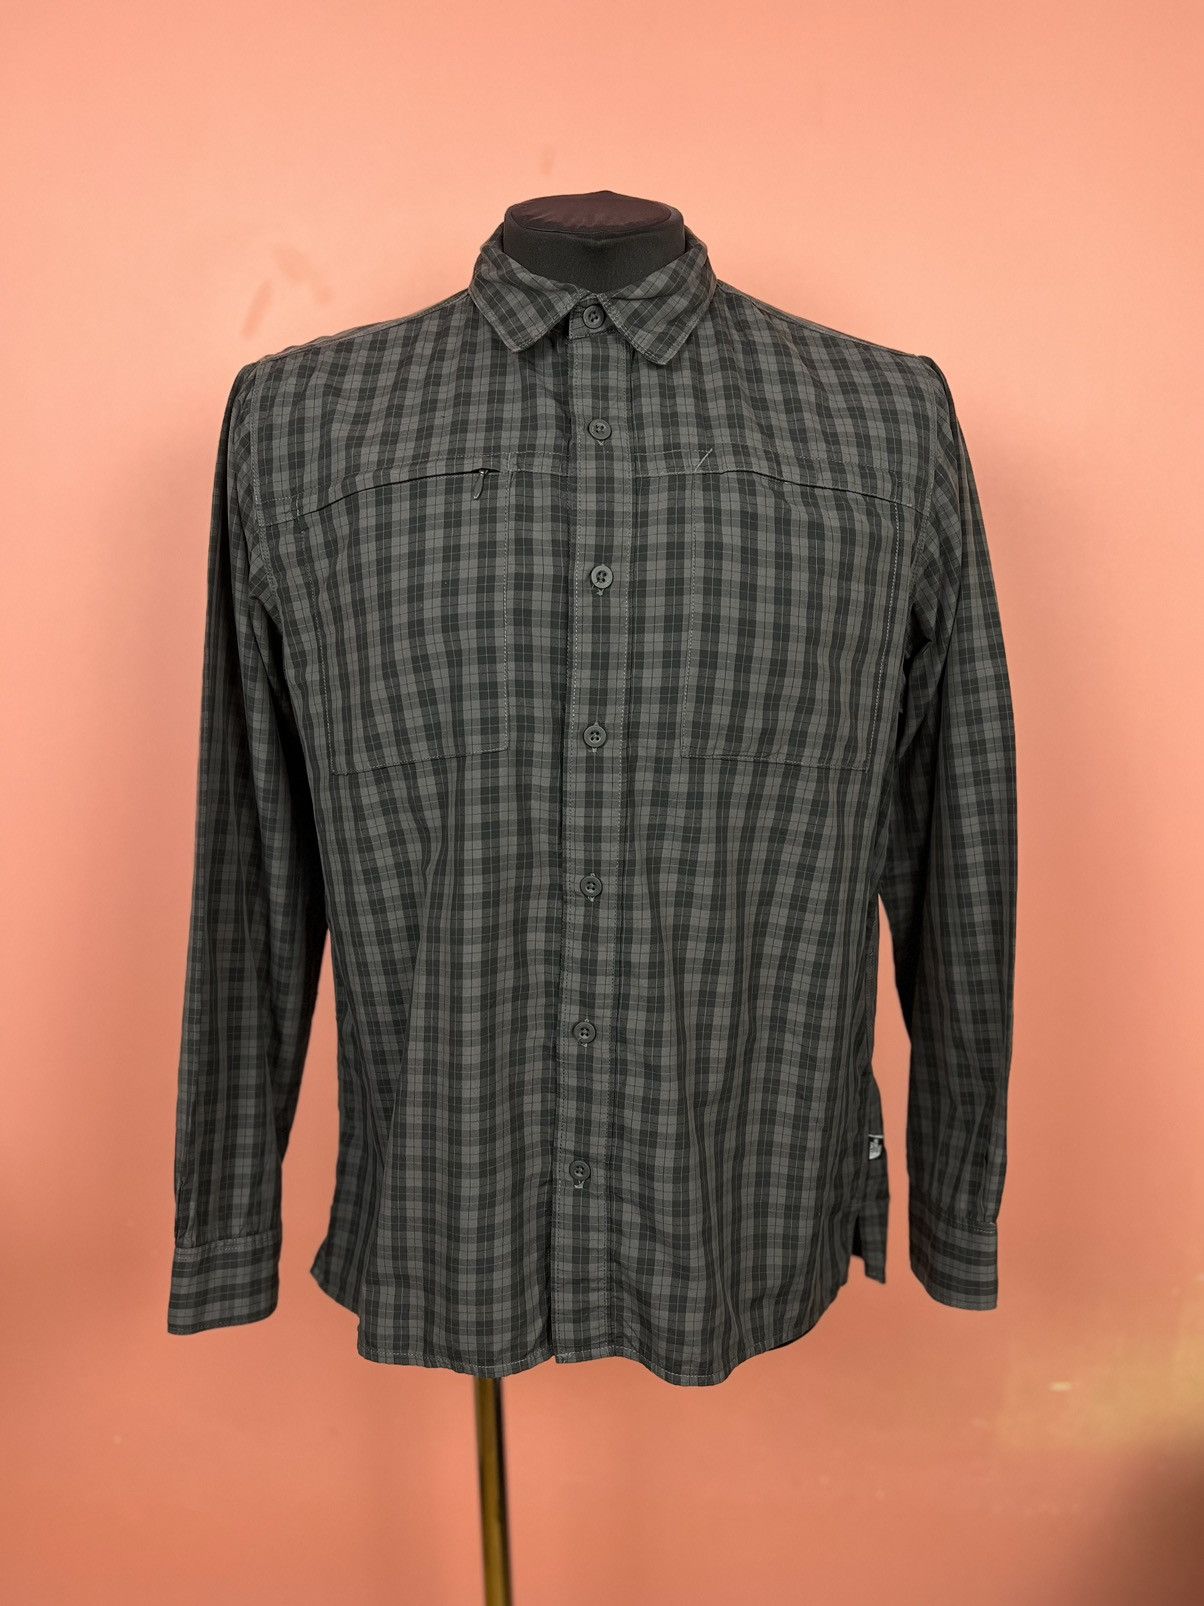 The North Face Vented Fishing Shirt, Green Plaid Outdoors, Mens XL